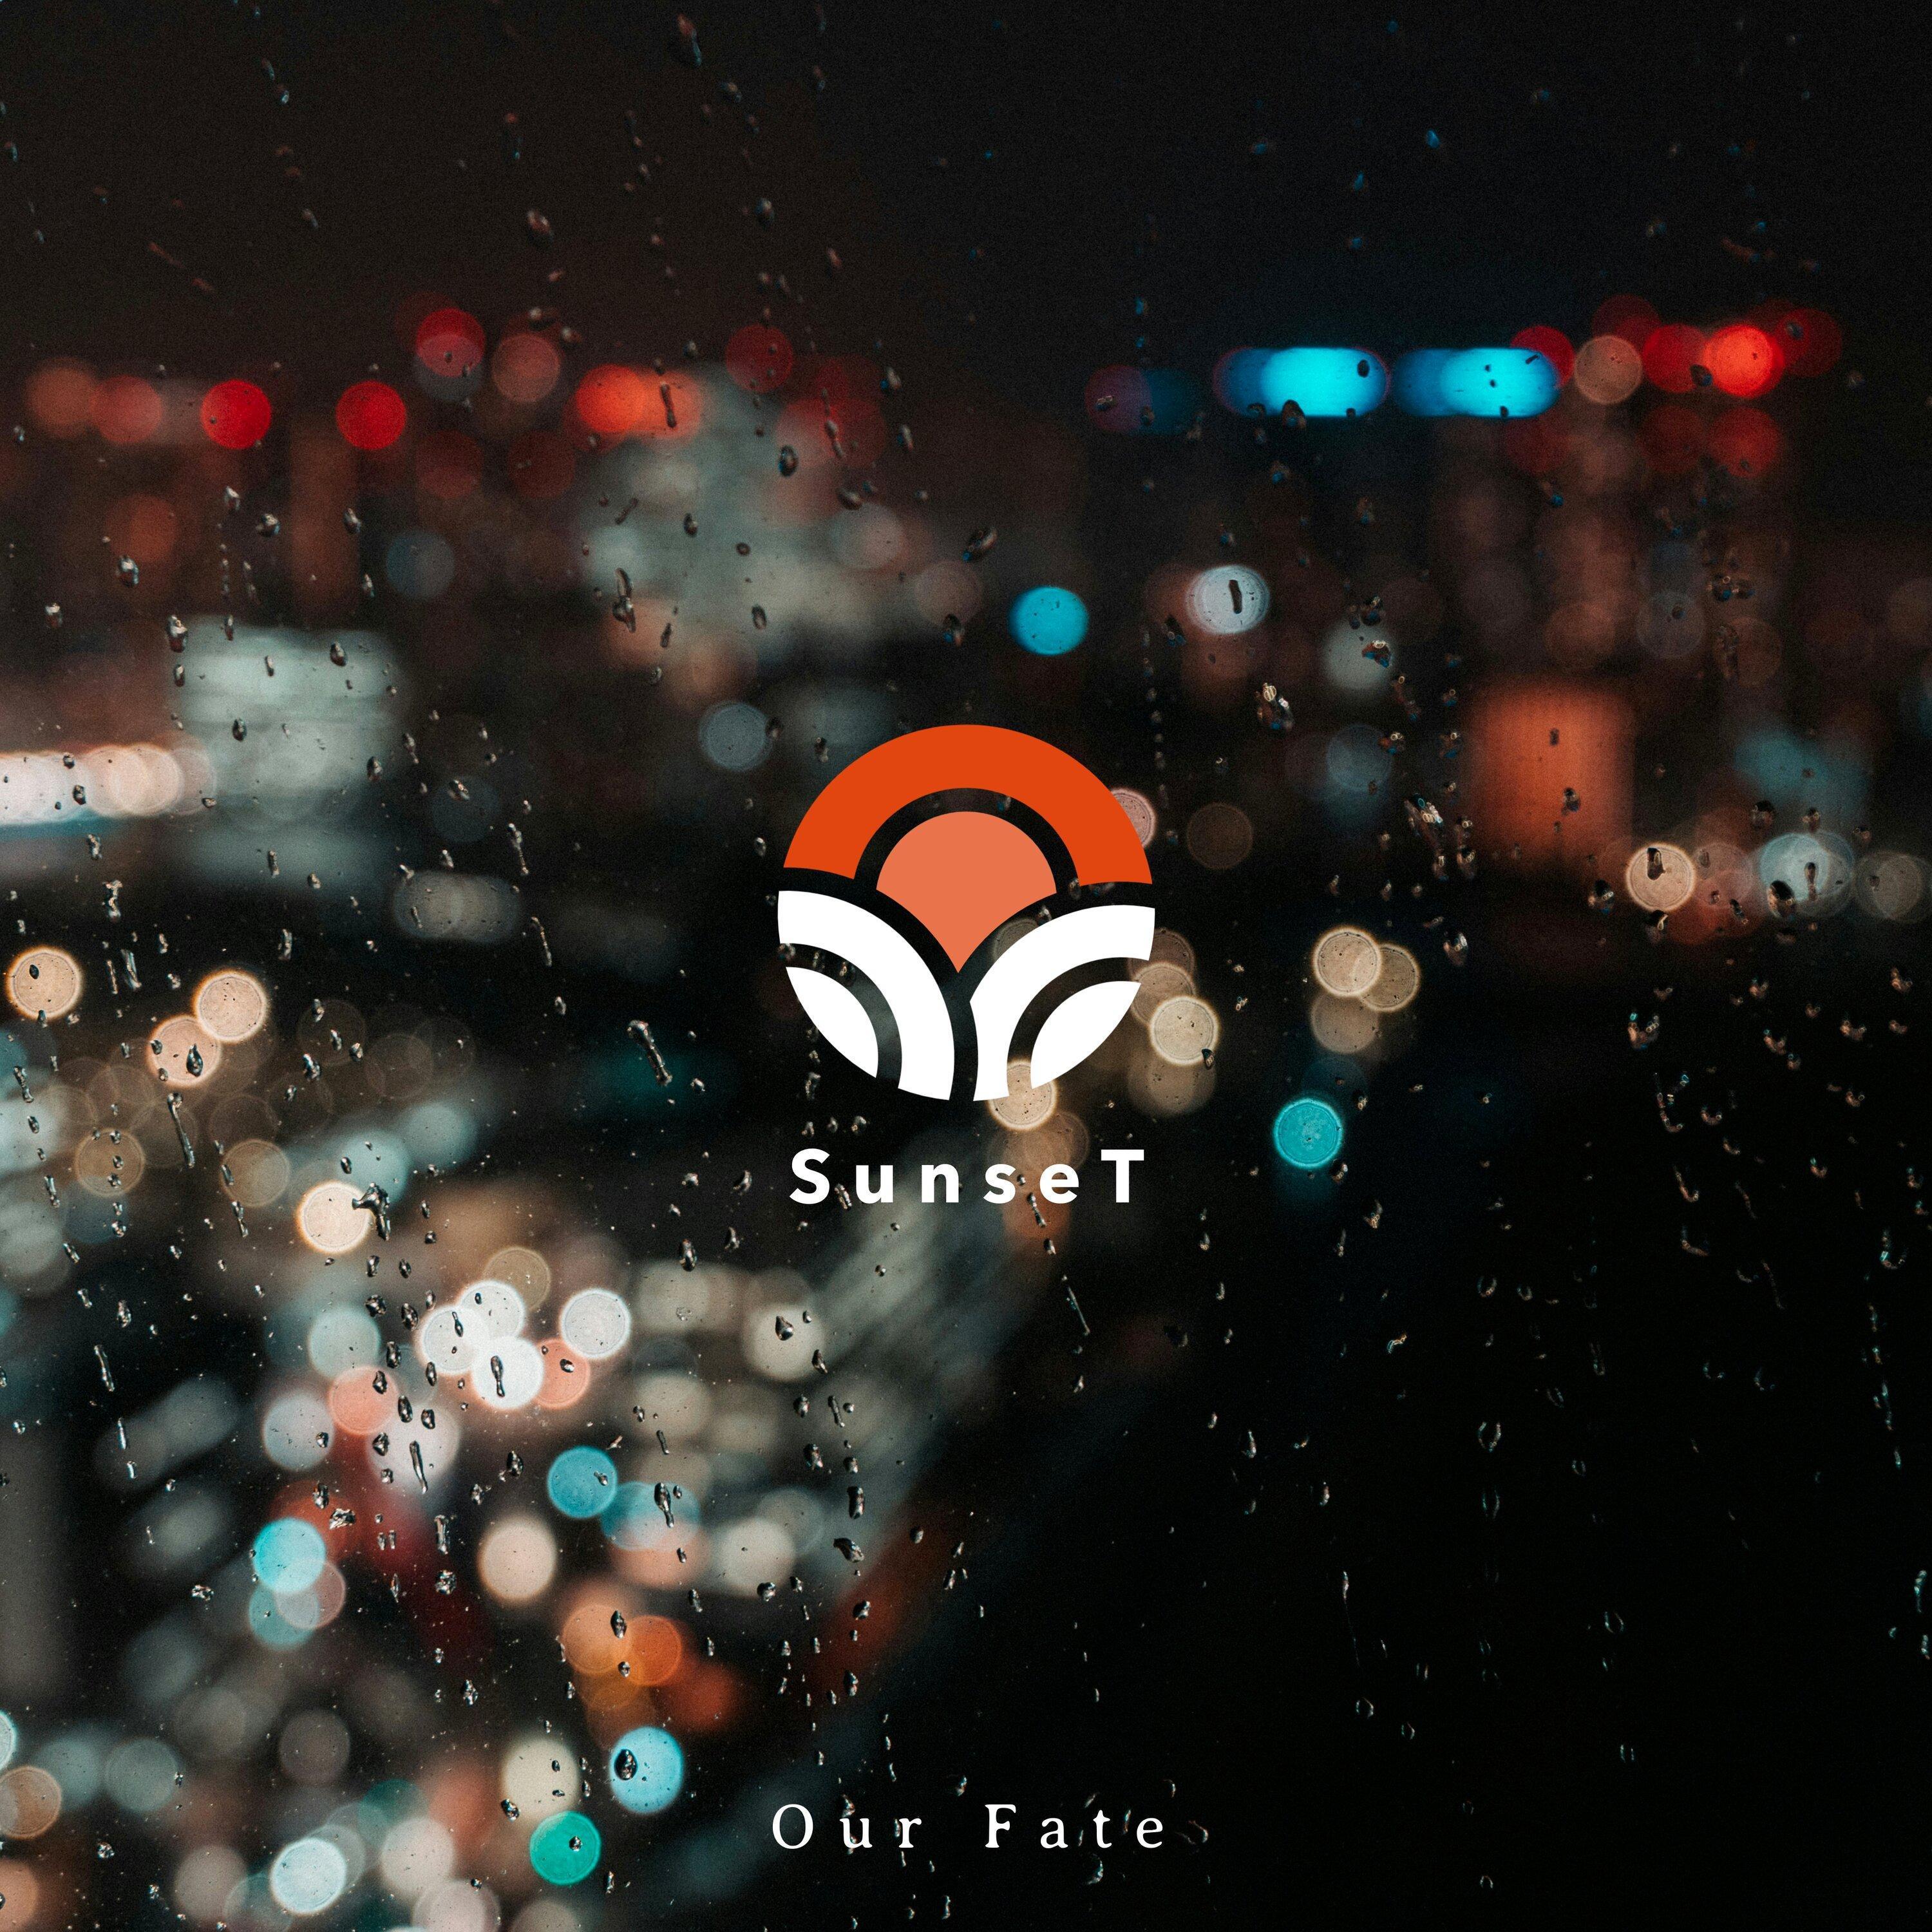 Sunset - Our Fate